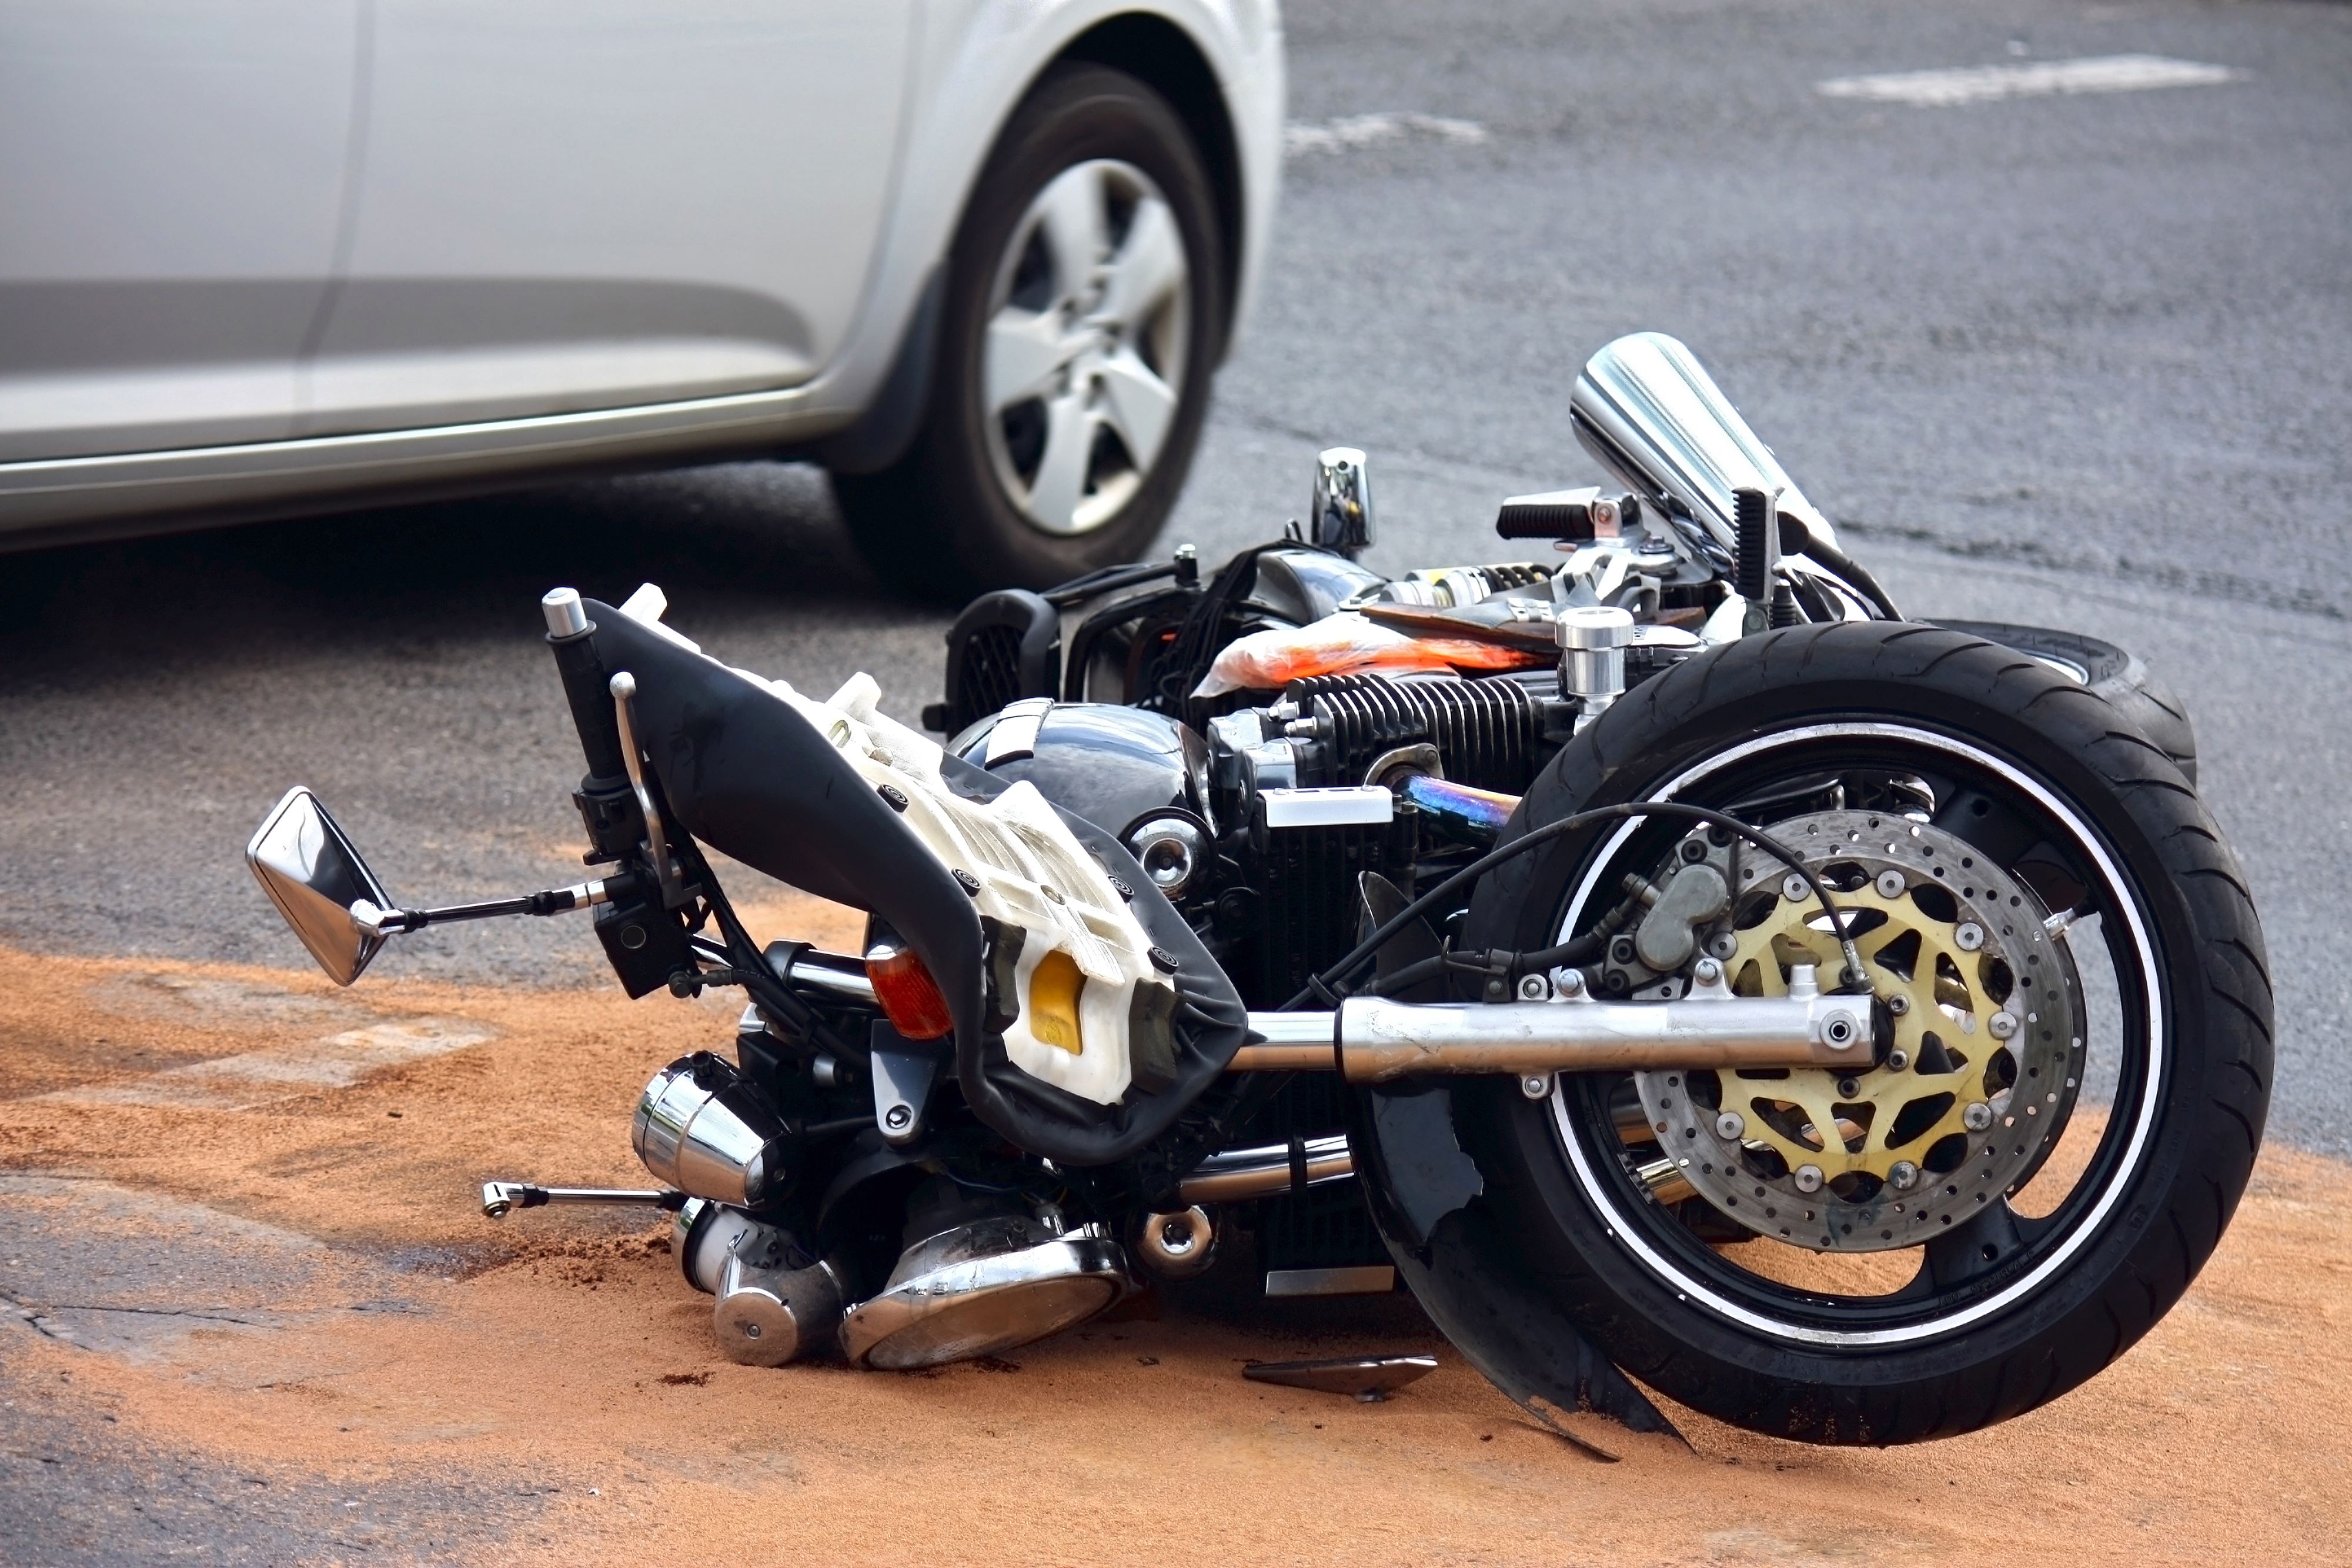 Motorcycle laying on the road after an accident